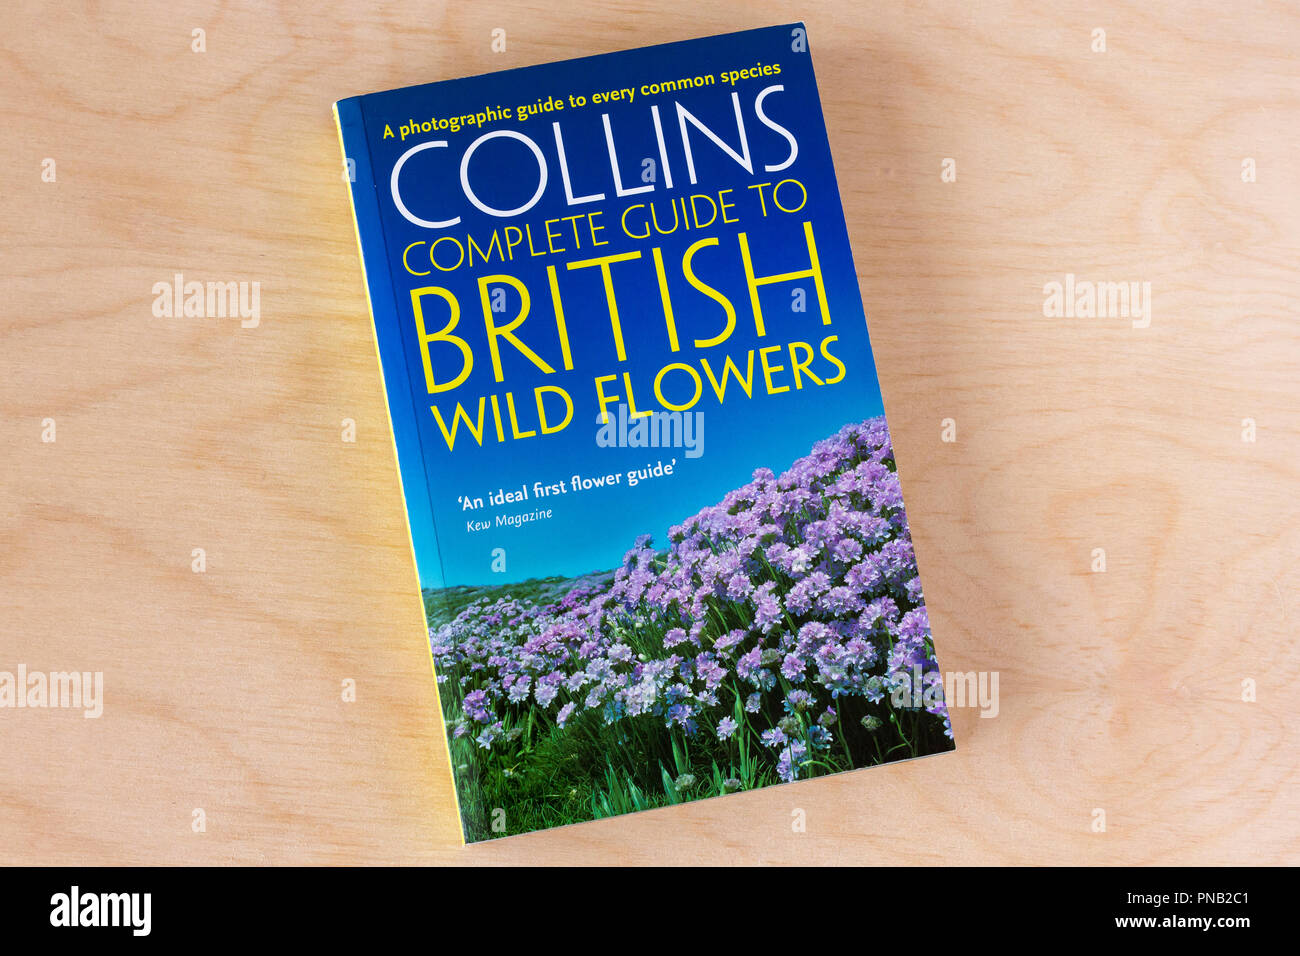 Collins Complete Guide To British Wild Flowers, nature resource guide book,  United Kingdom Stock Photo - Alamy